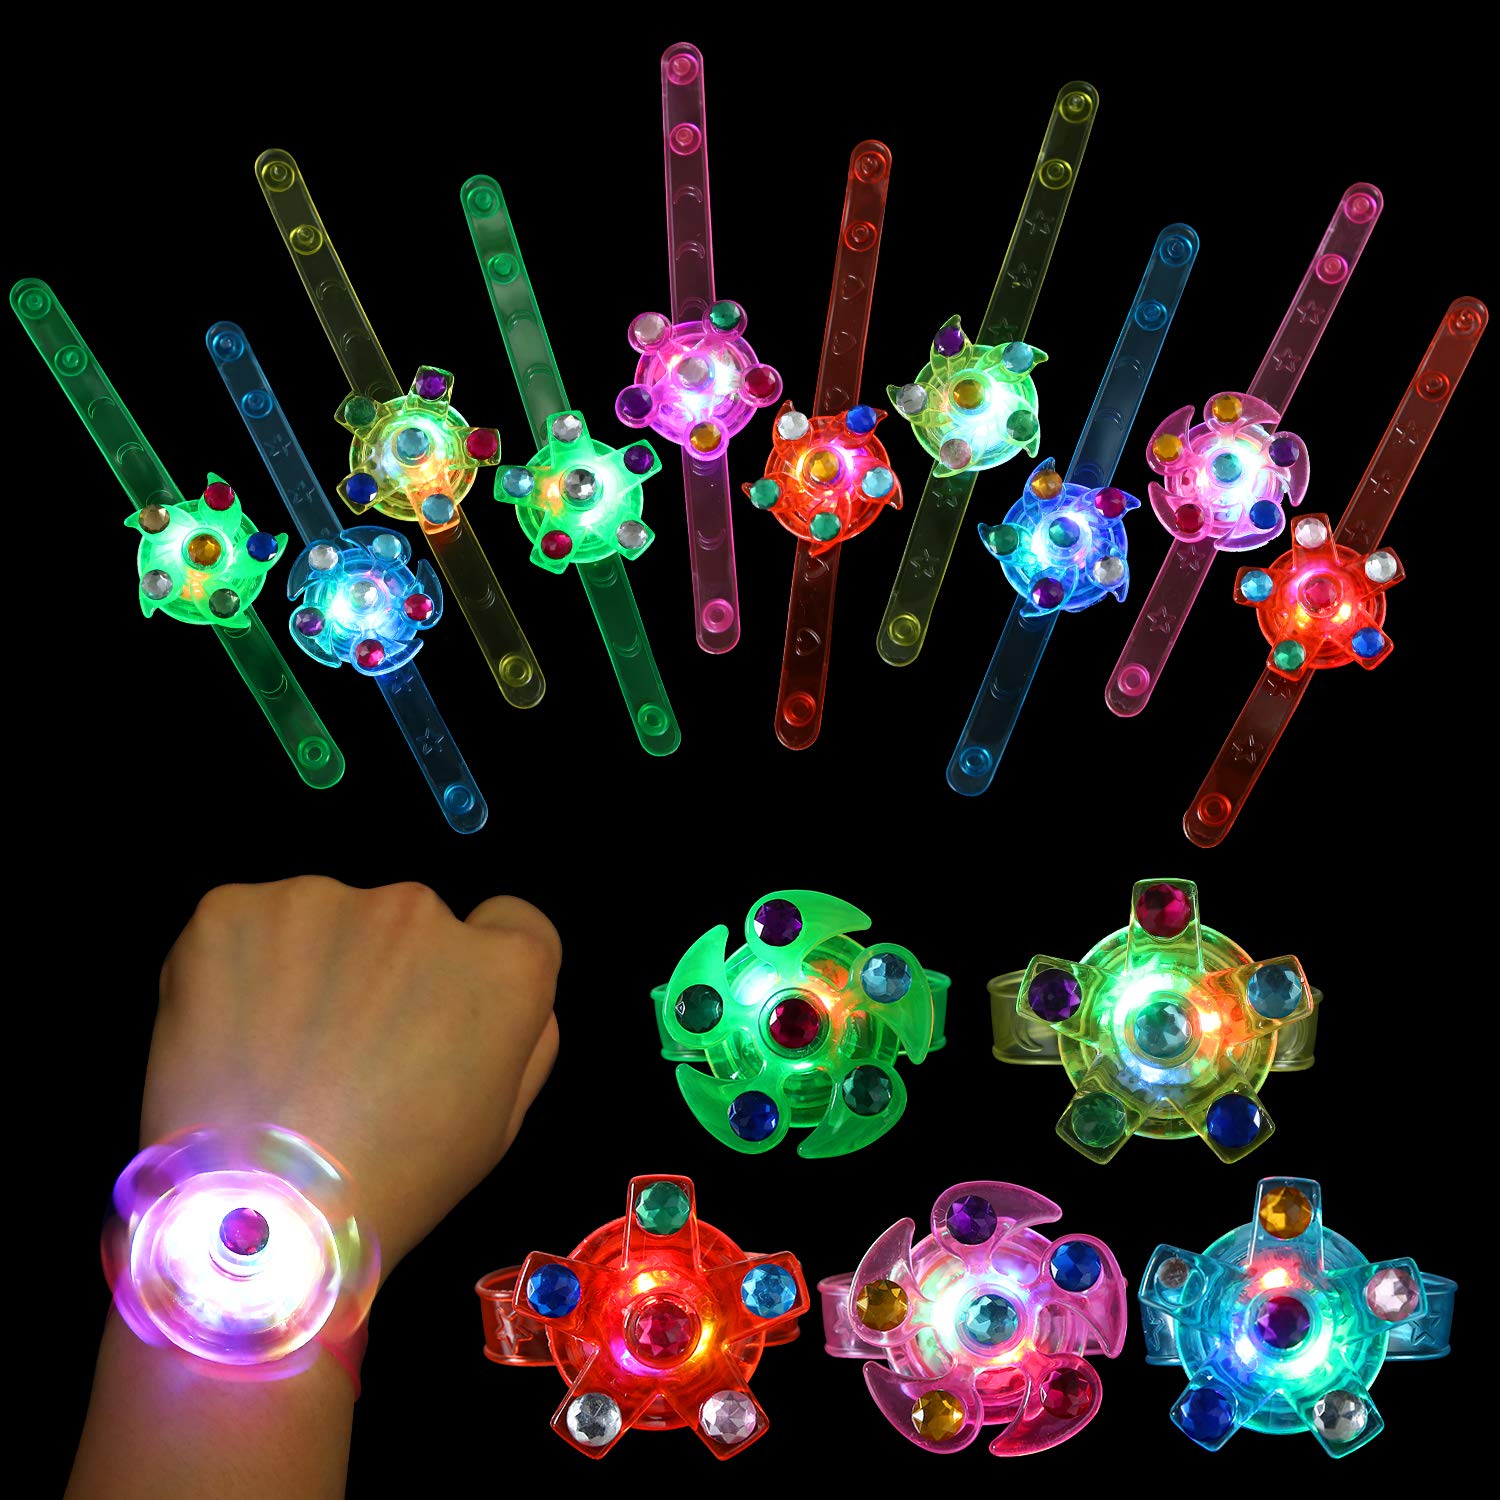 SCIONE Kids Party Favors 24 pack Goodie Bag Stuffers LED Light Up Fidget Bracelet Glow in The Dark Party Supplies Return Gifts for Kids Birthday Valentines Halloween Christmas Party Favors